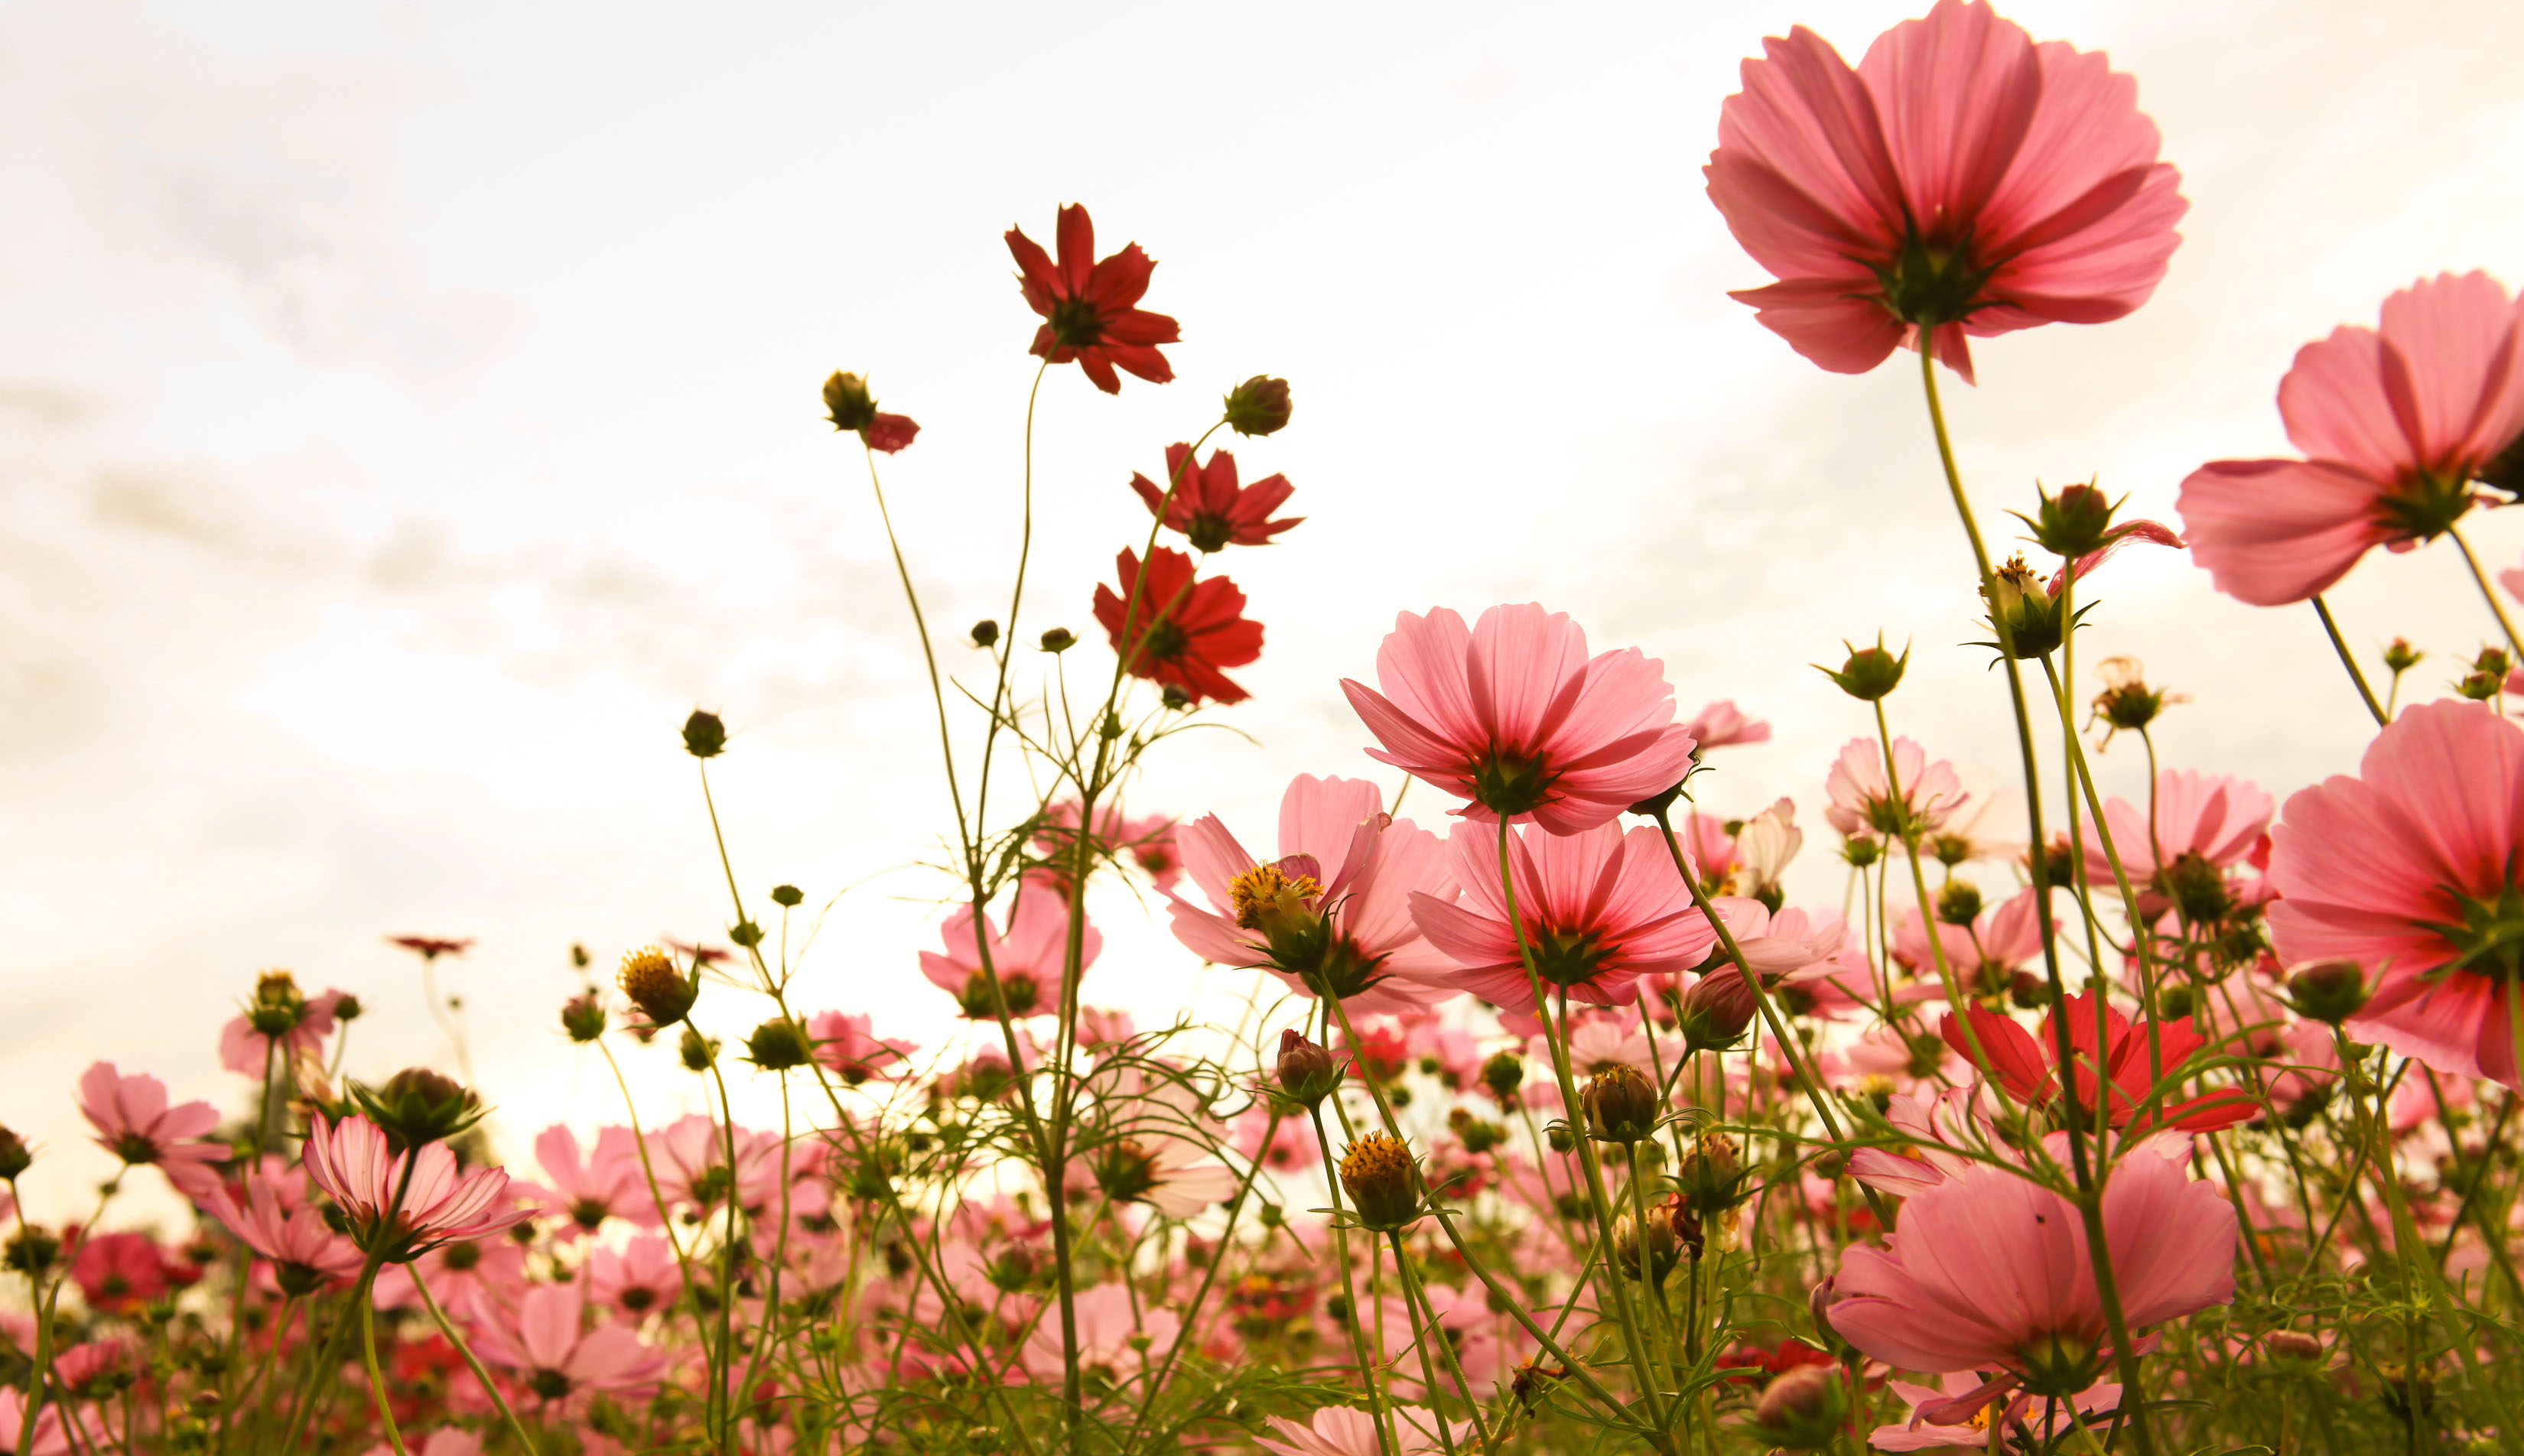 Sunlit field of pink cosmo flowers